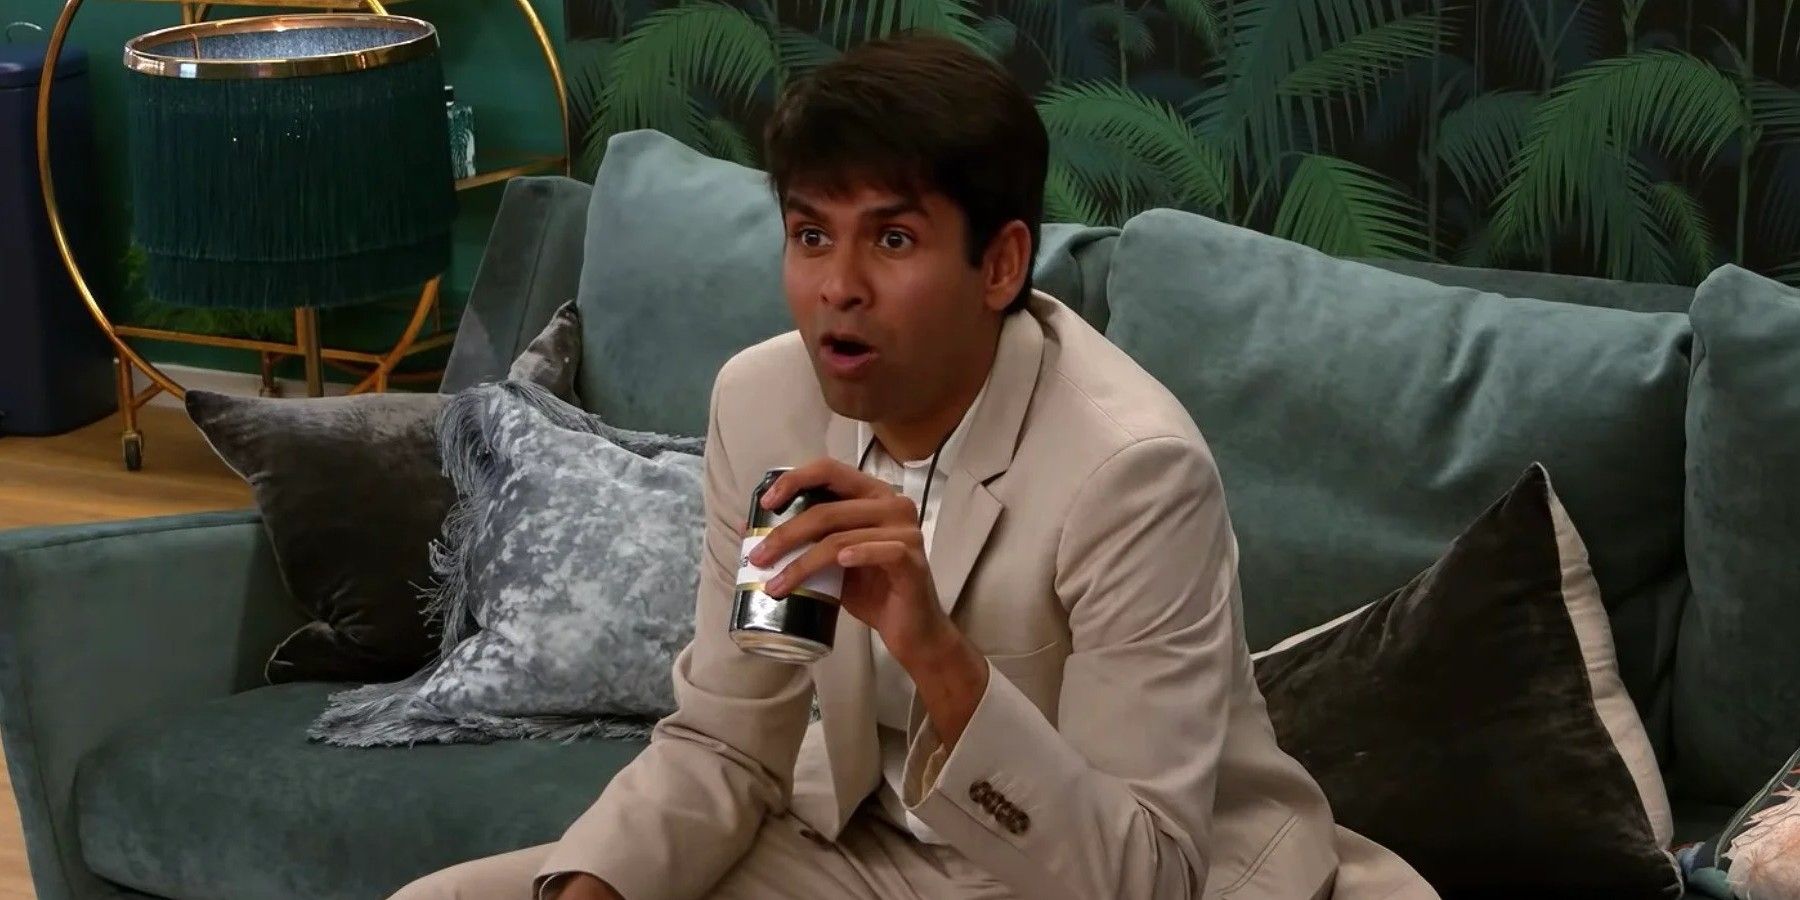 Shubham reacts in surprise while sitting on the couch holding a beverage can in his apartment on The Circle.